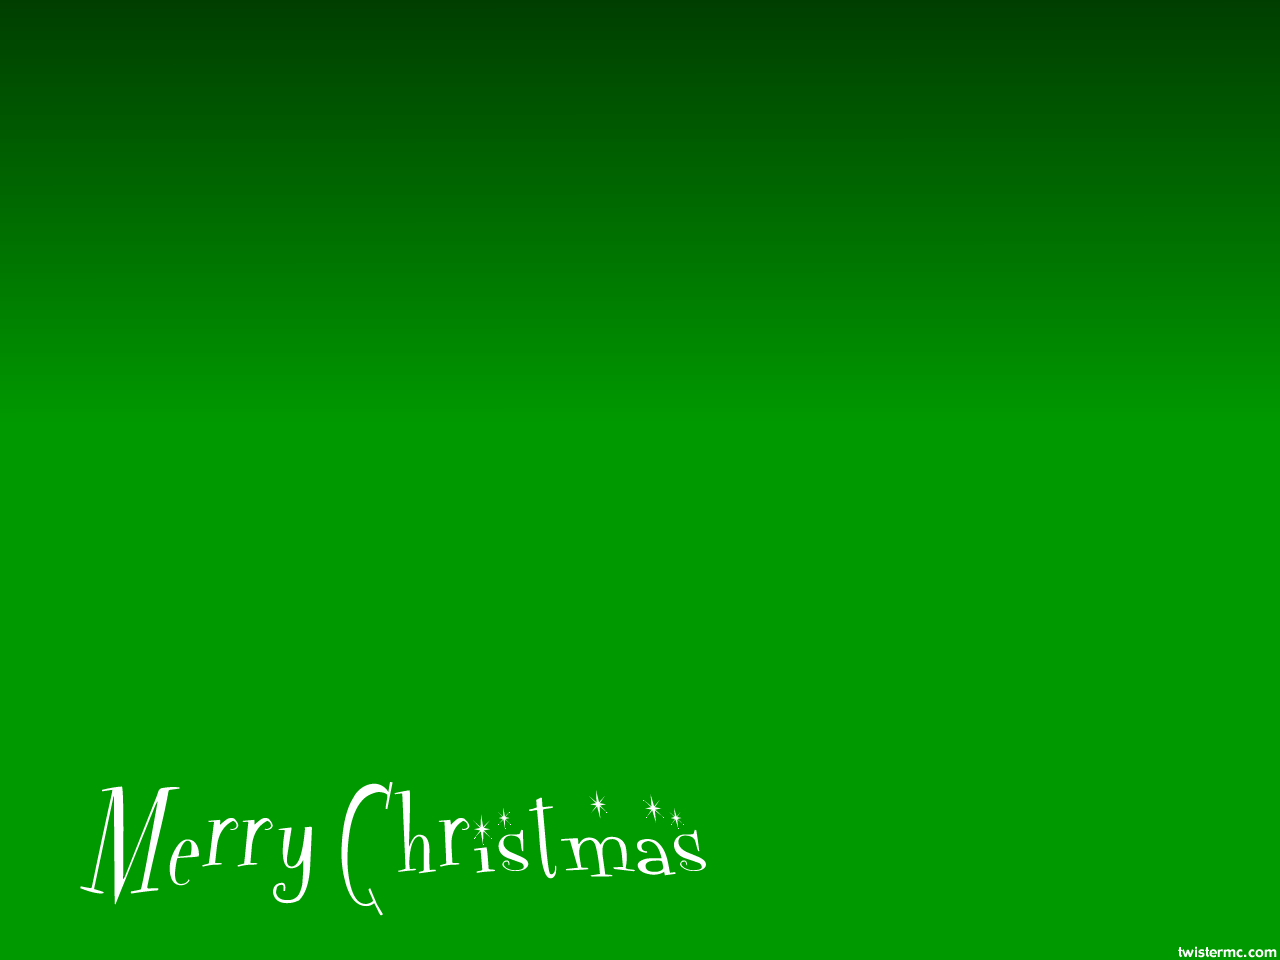 Green Screen Christmas Background